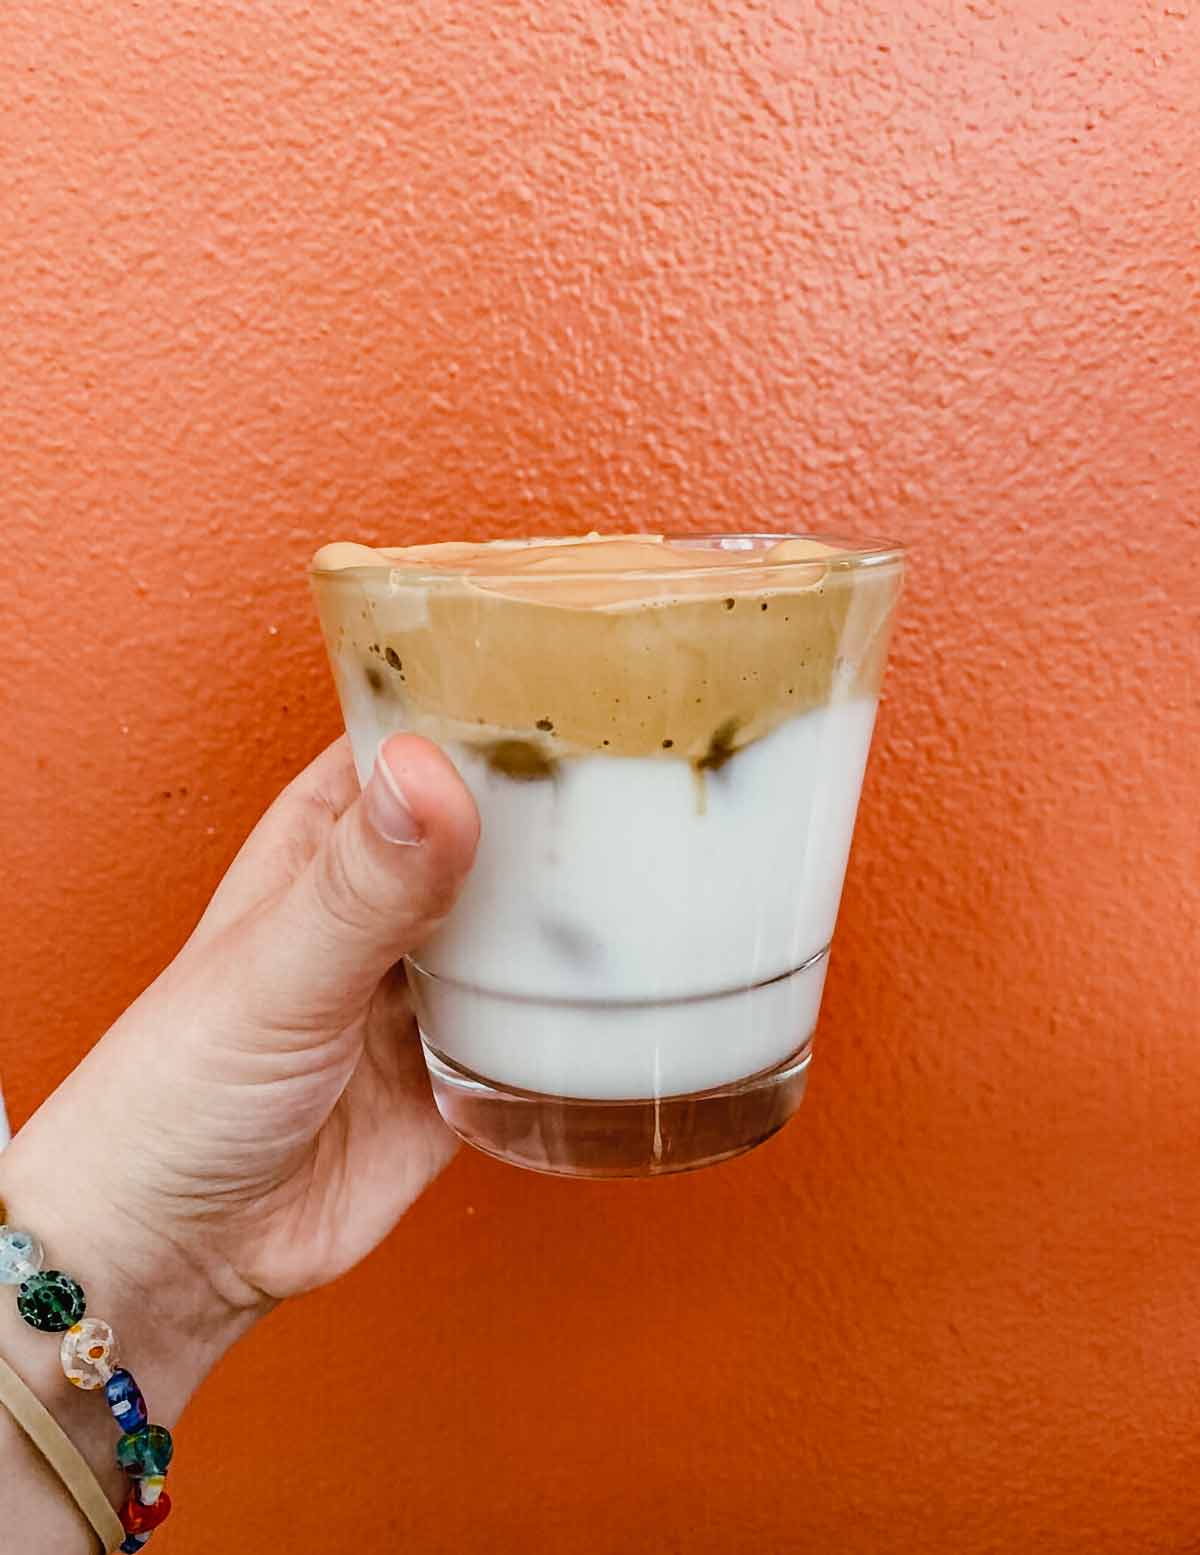 Whipped coffee in a clear glass, being held in front of an orange wall.